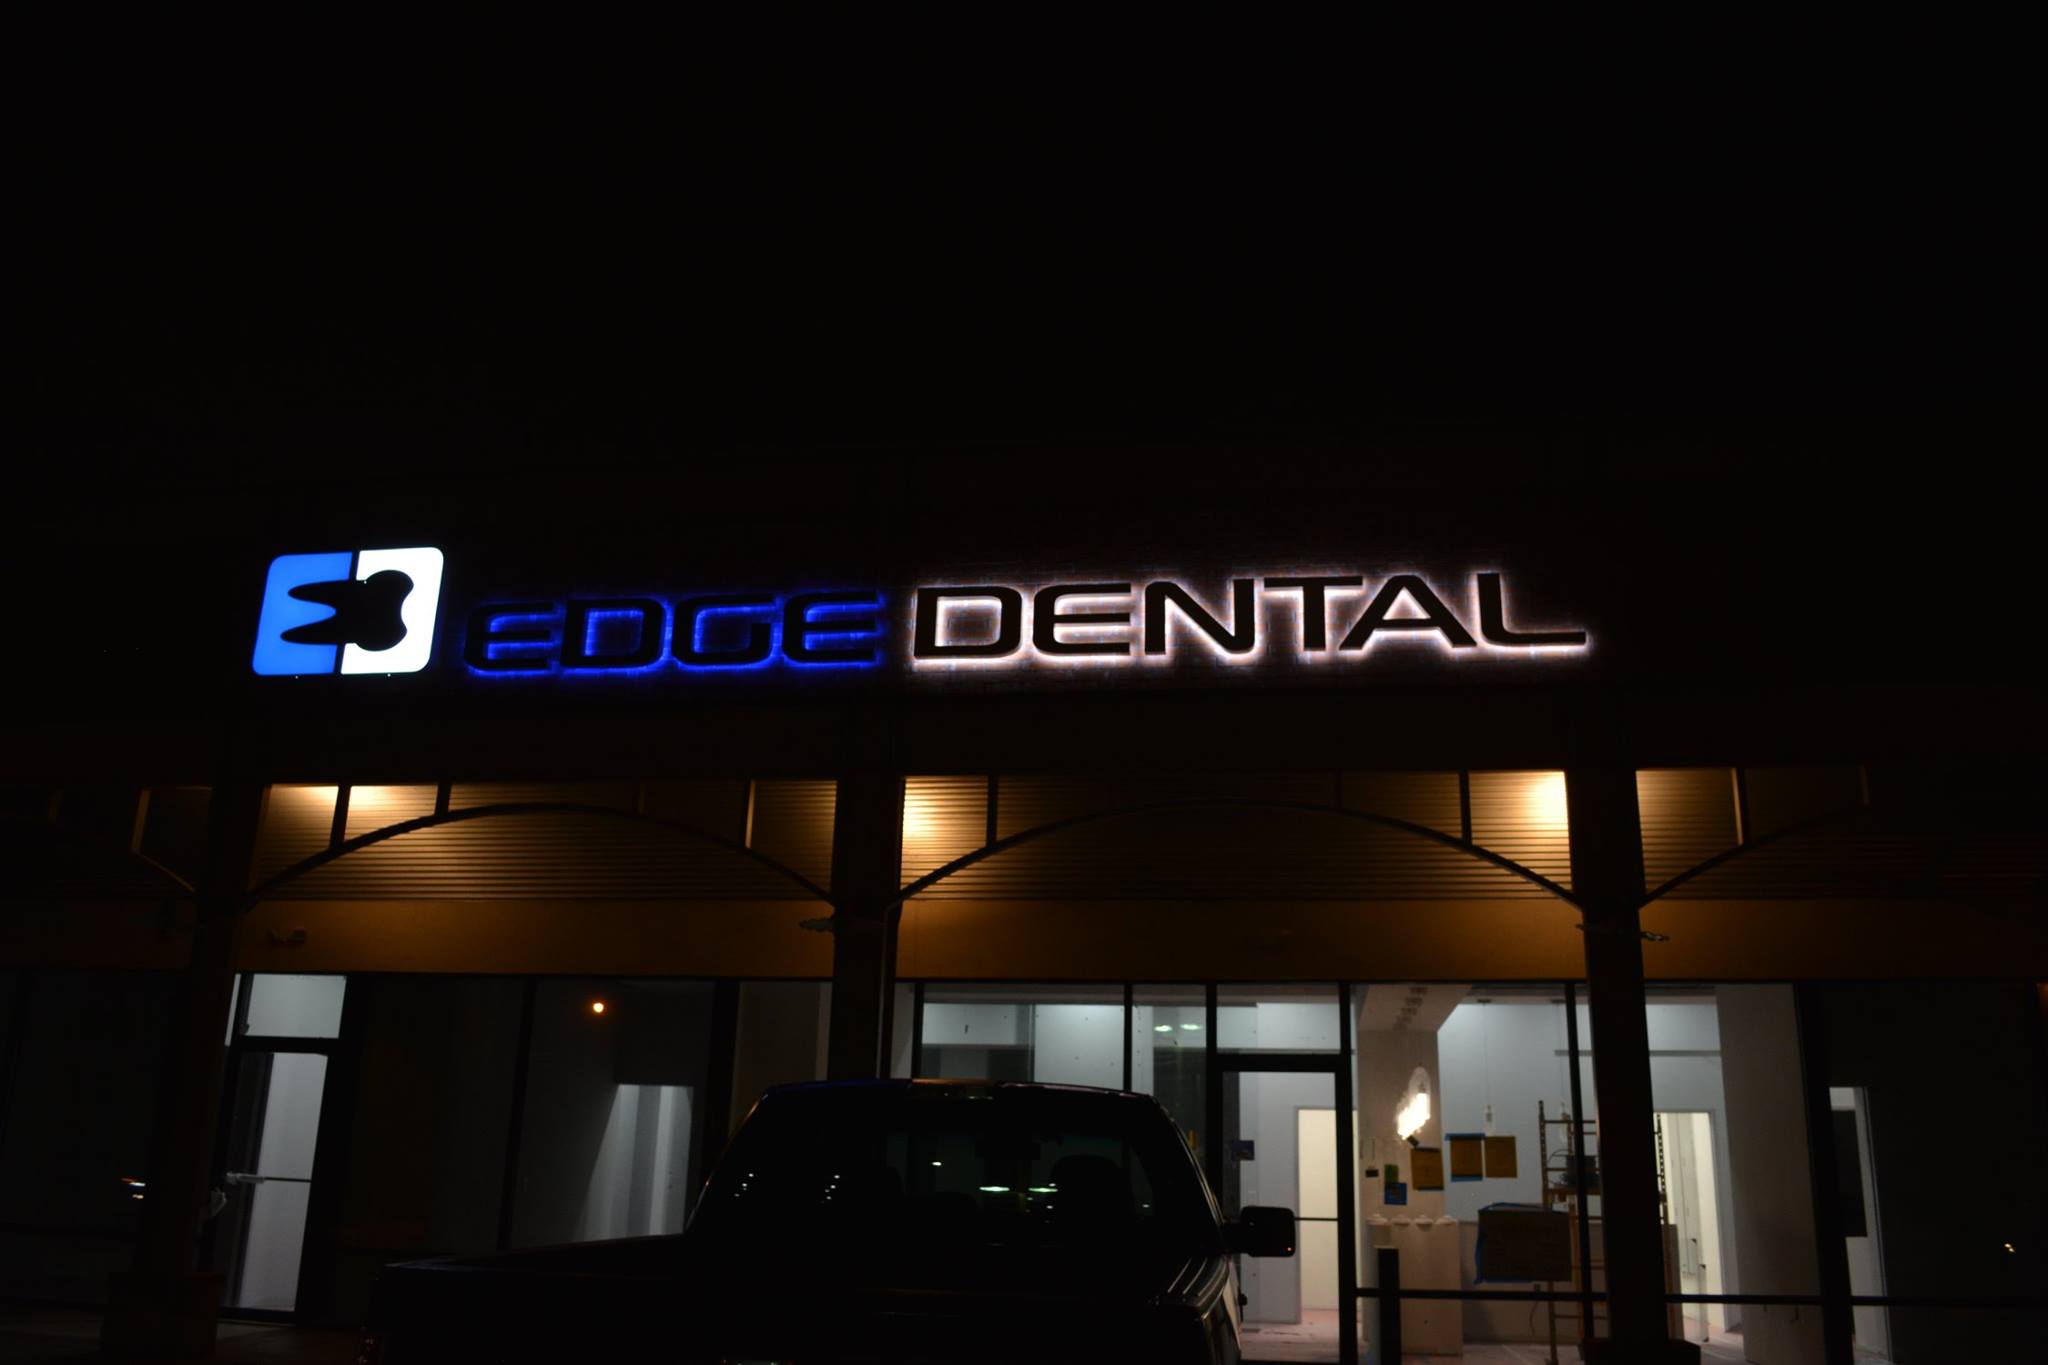 Dental Office Signs By Prosource Derry Londonderry Salem Manchester Nh